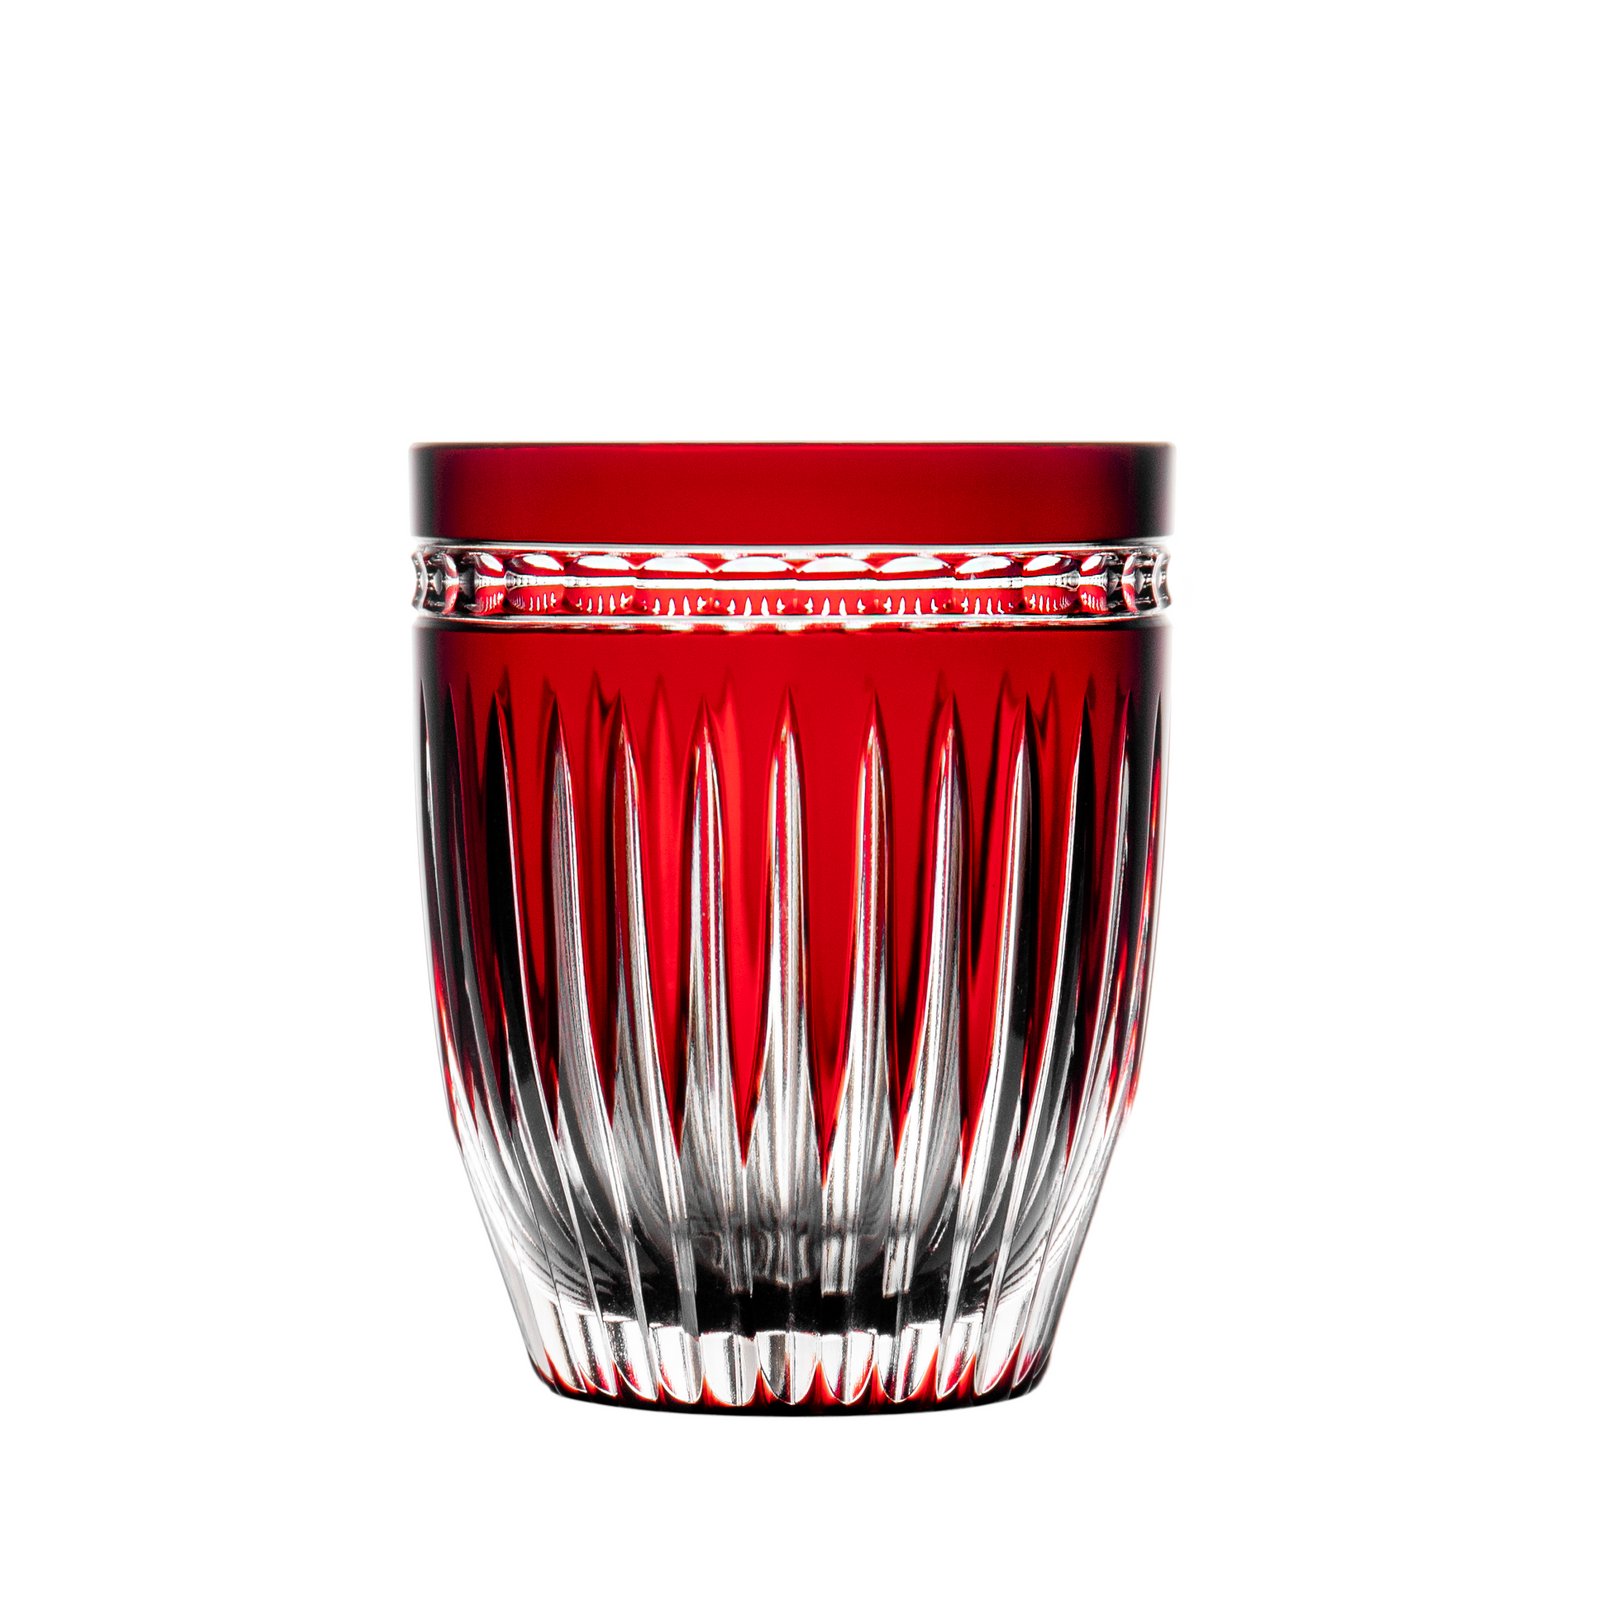 Waterford - Times Square collection Imagination Ruby Red Champagne